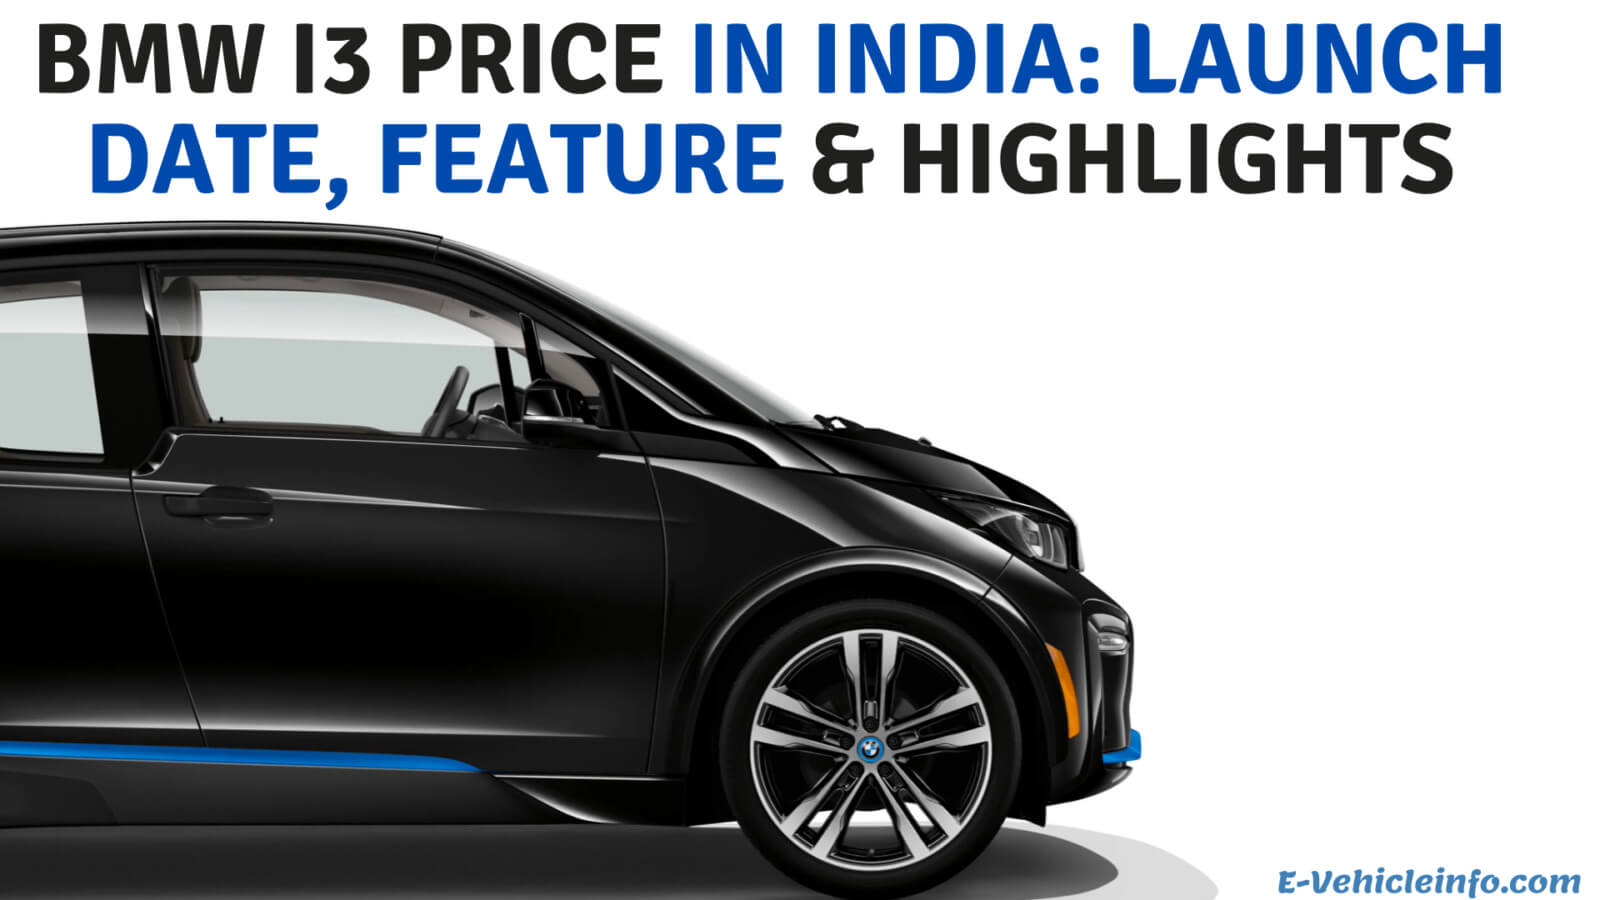 https://e-vehicleinfo.com/bmw-i3-price-in-india-launch-date-feature-highlights/